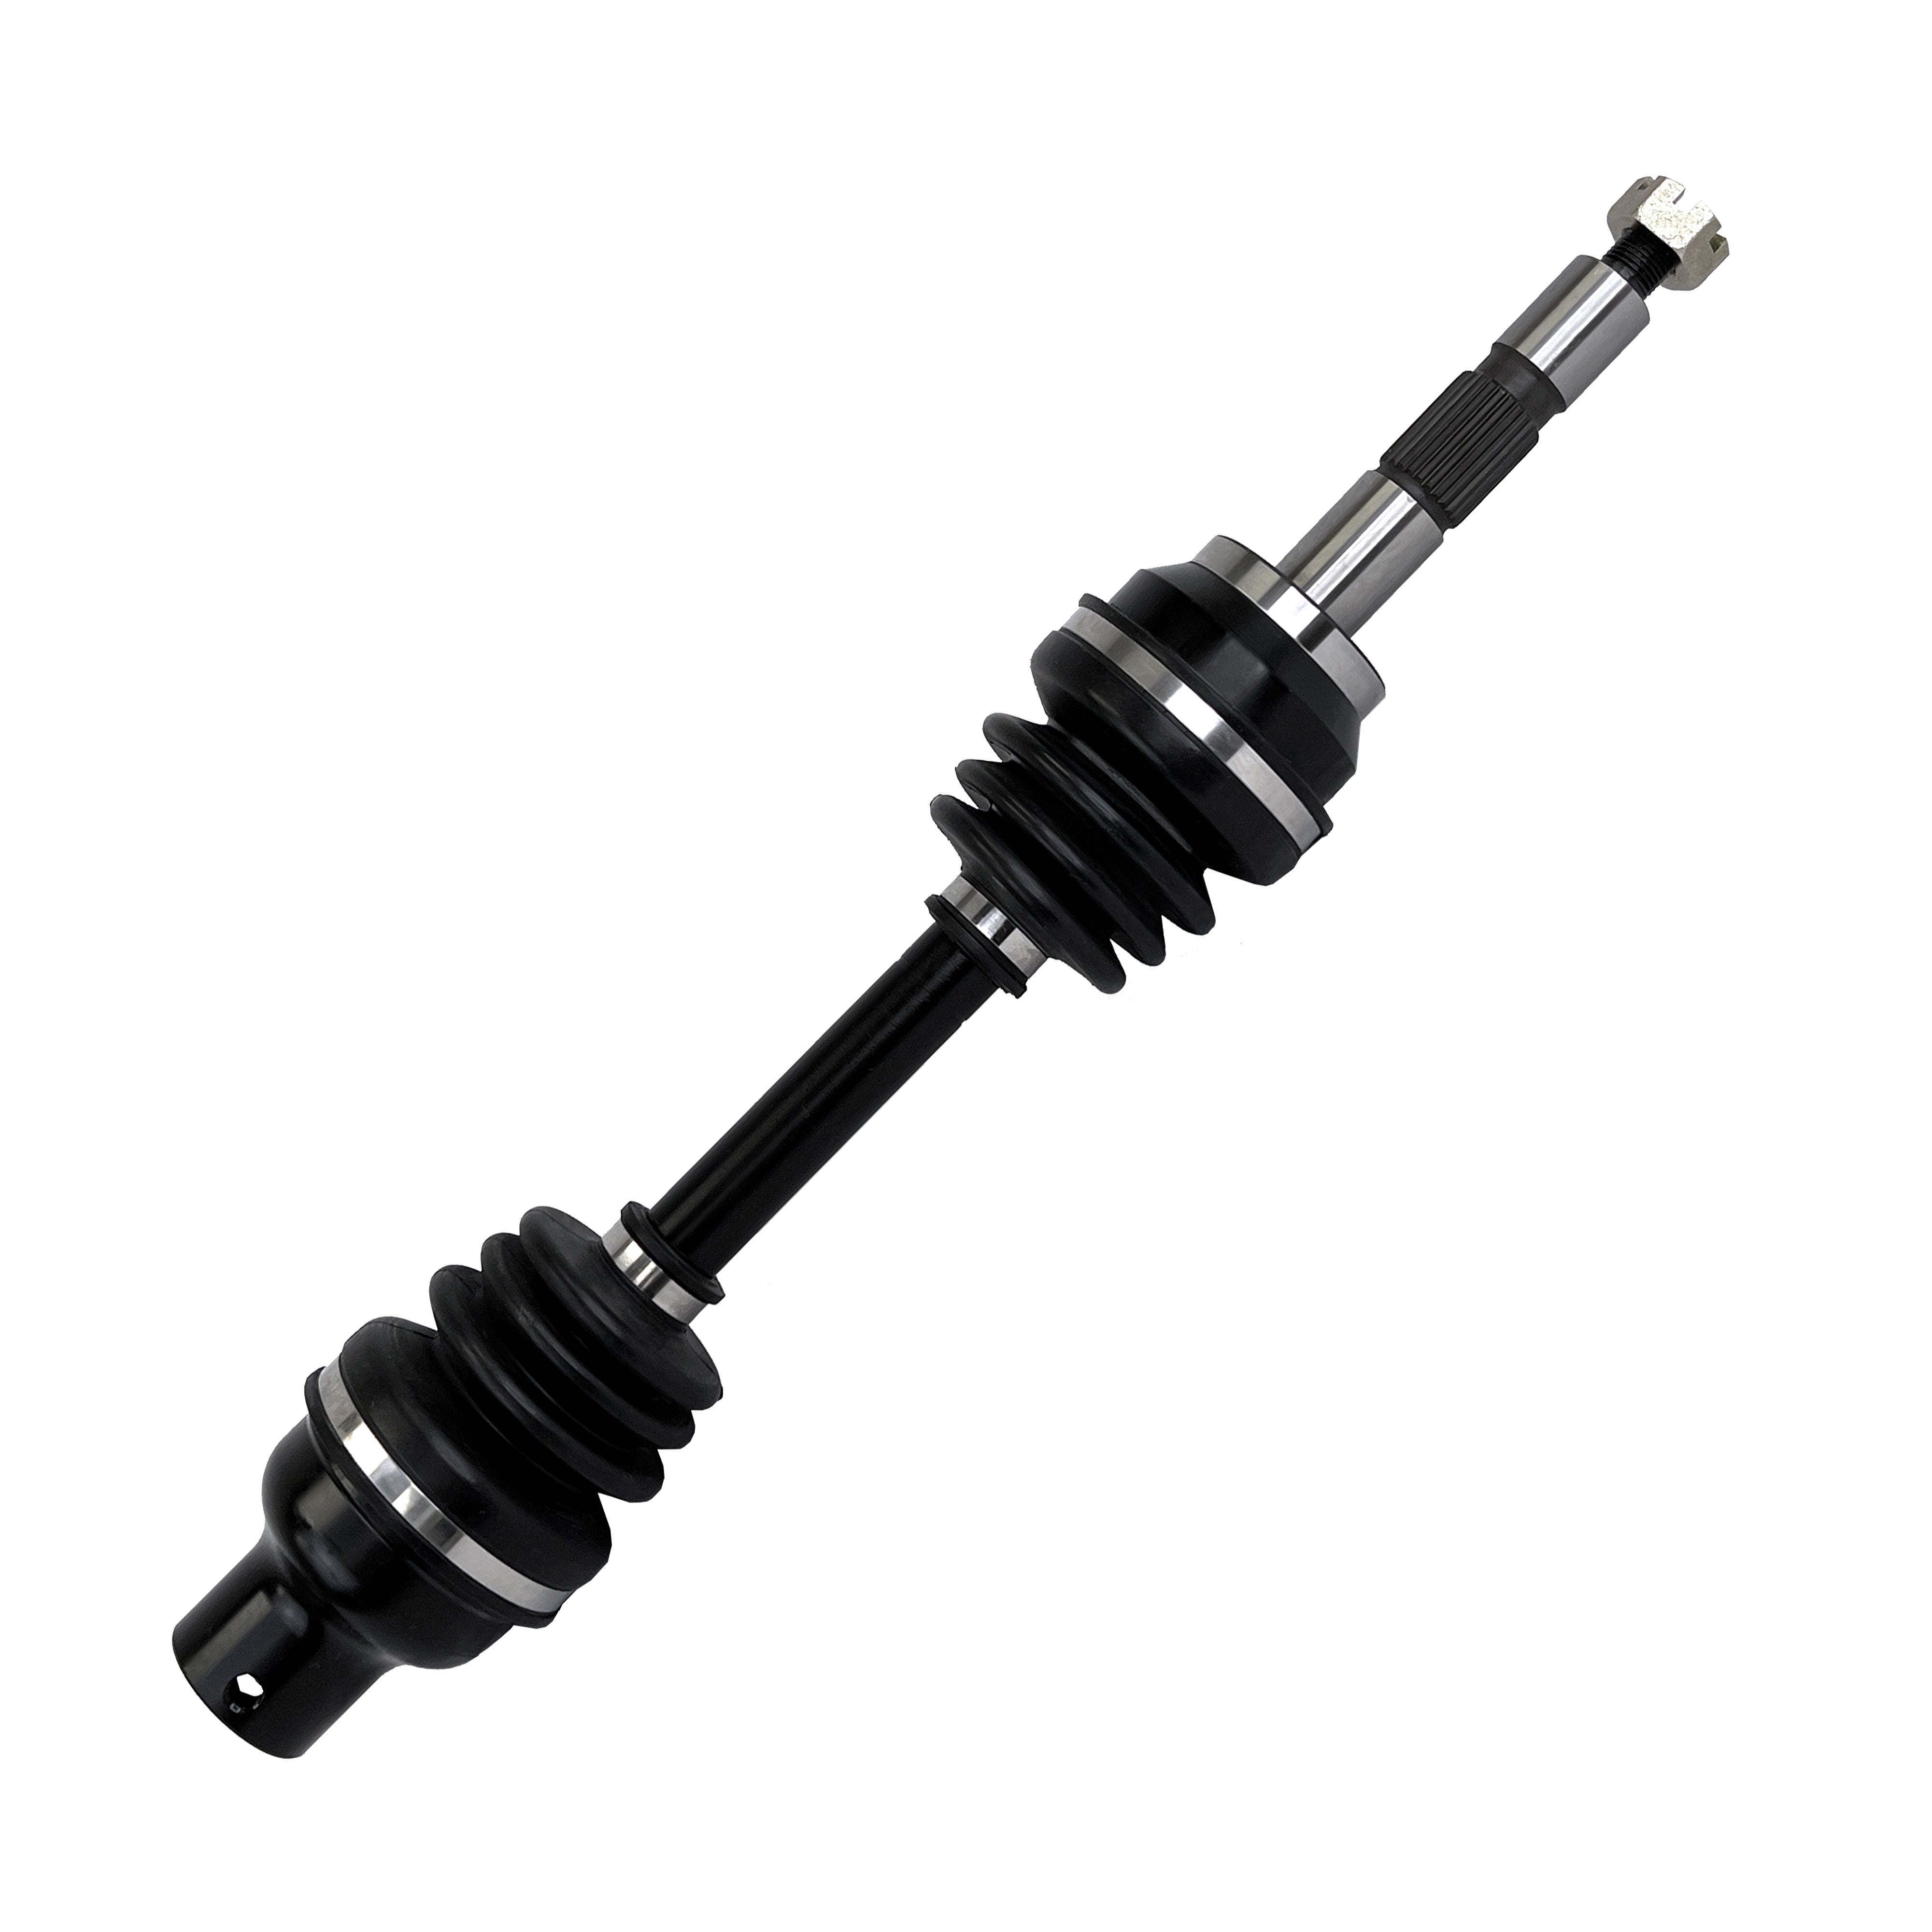 Performance Axle for Polaris Worker 335 